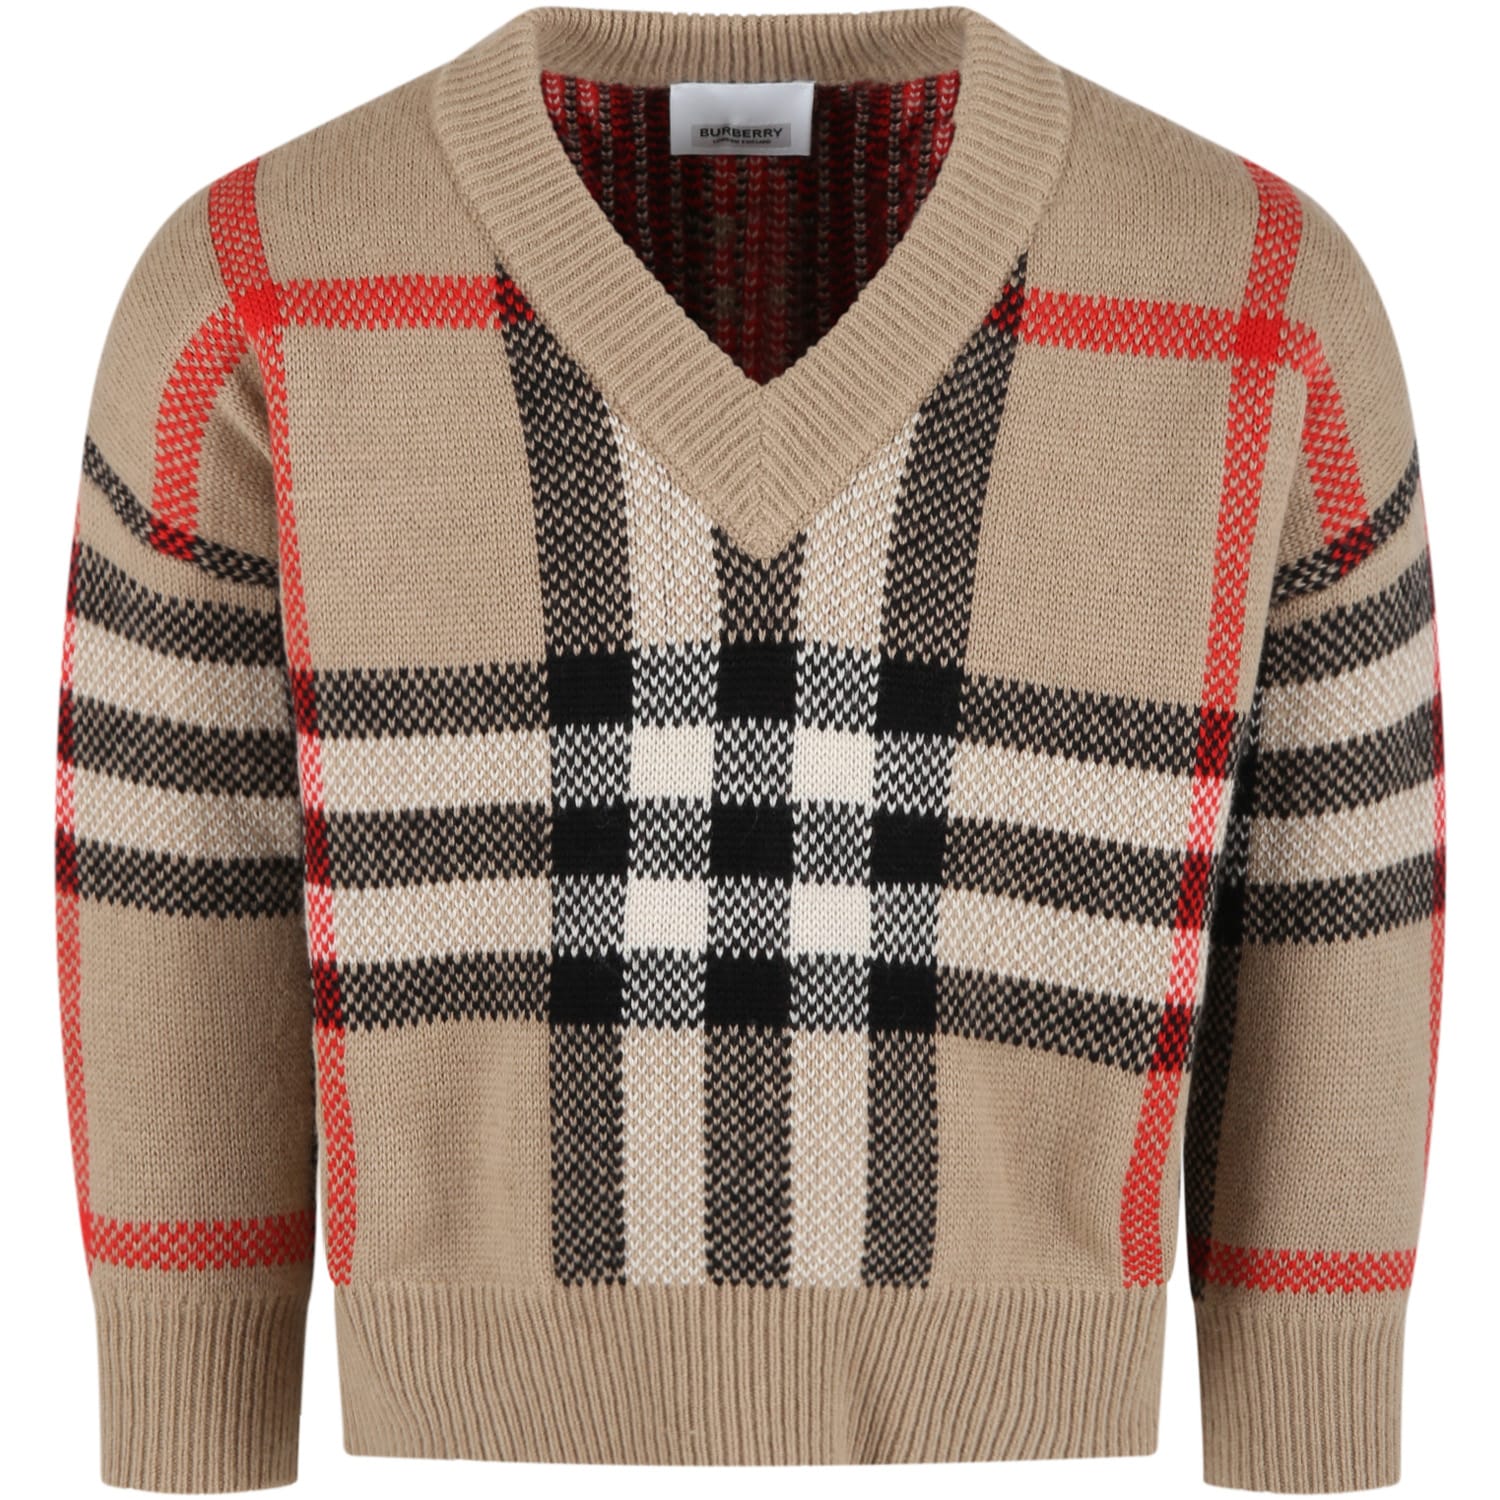 Burberry Beige Sweater For Kids With Vintage Checks